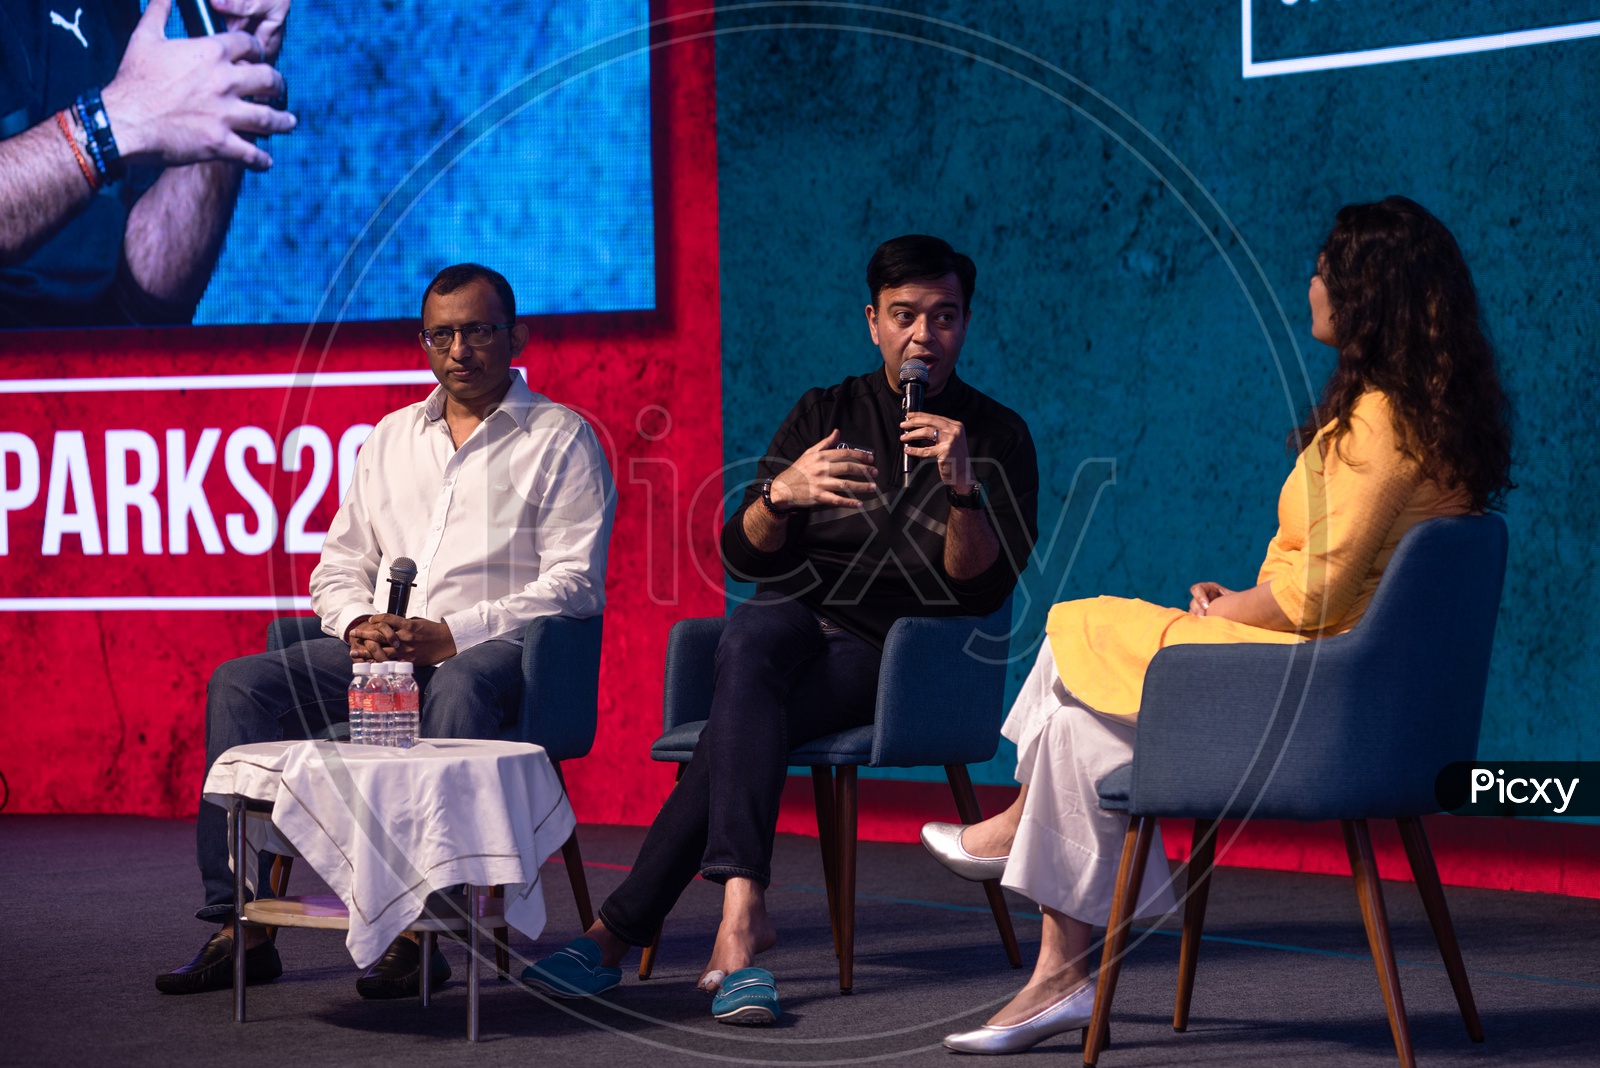 Rajendra Gupta( Founder and CEO,DailyHunt) Umang Bedi(President,DailyHunt) and Shradha Sharma(CEO,YourStory) at TechSparks 2018